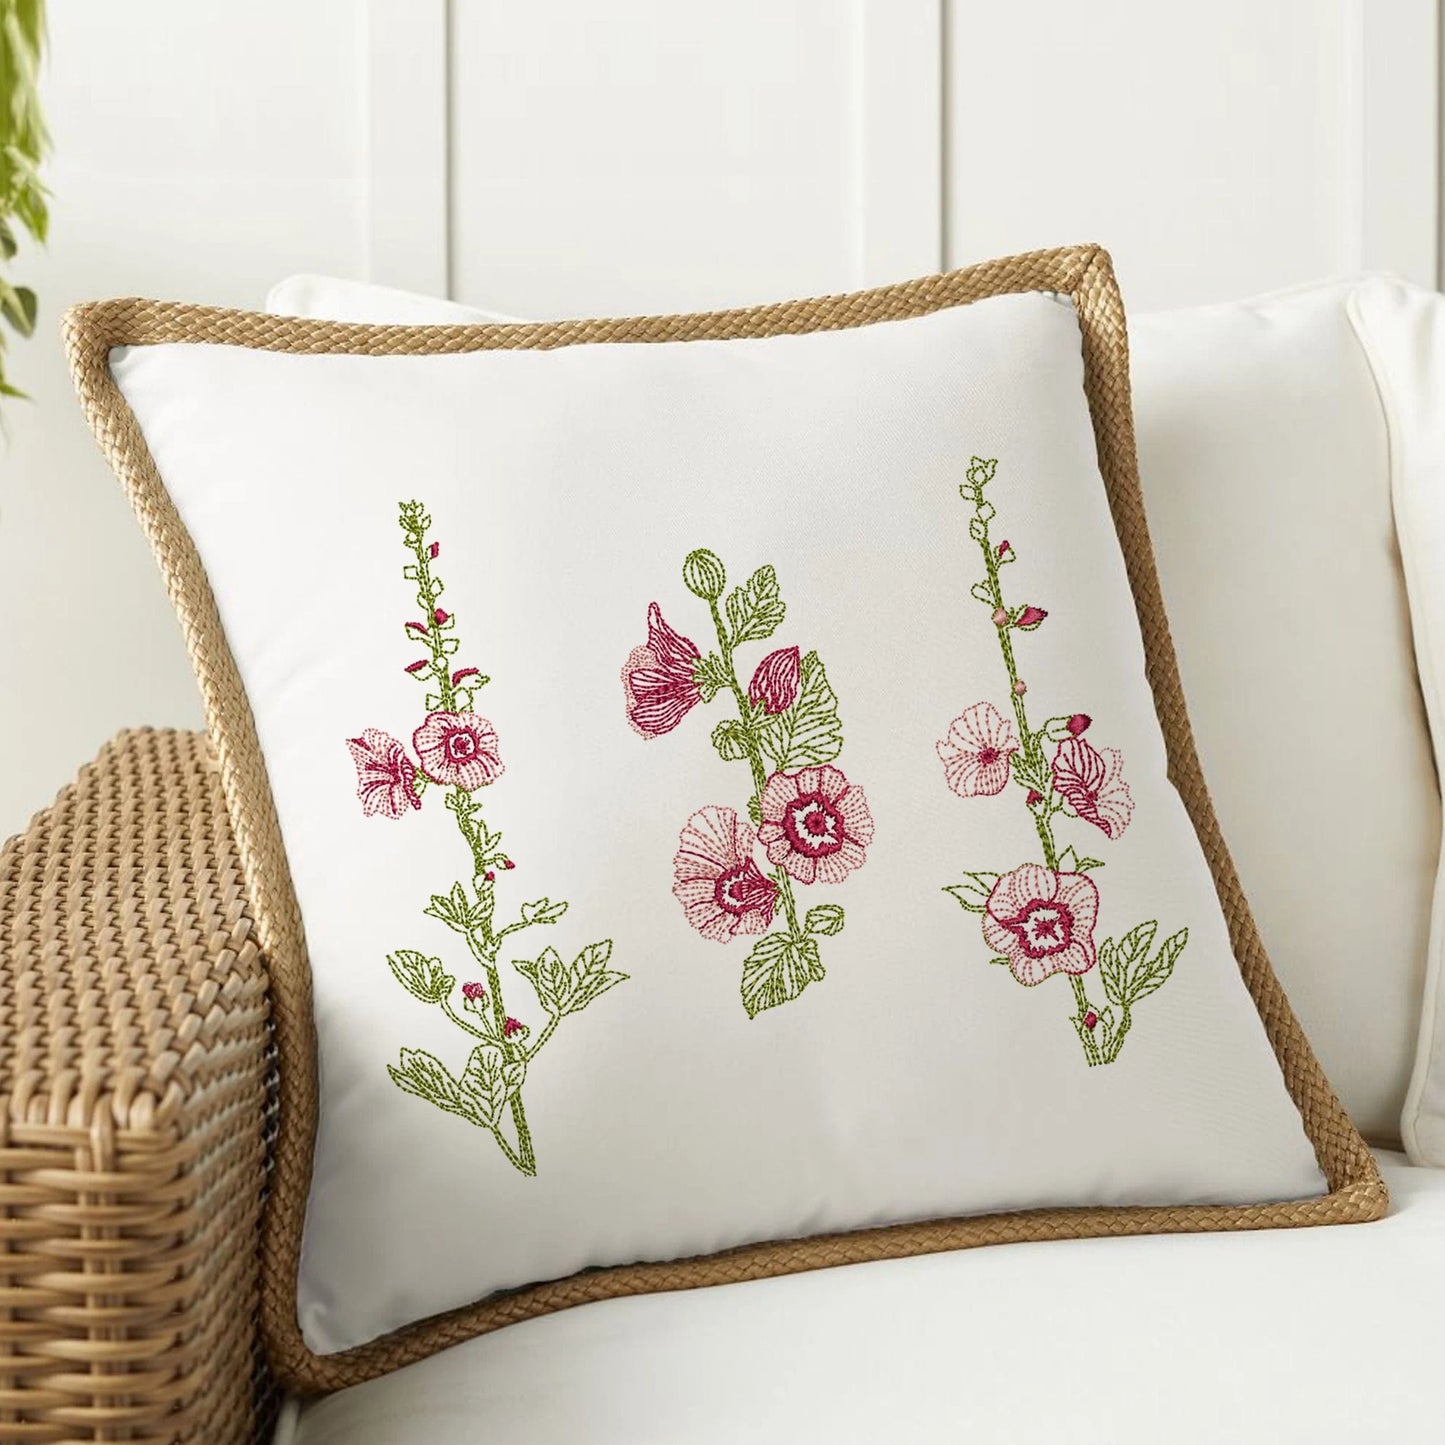 Alcea Flower Machine Embroidery Design on rustic style pillow